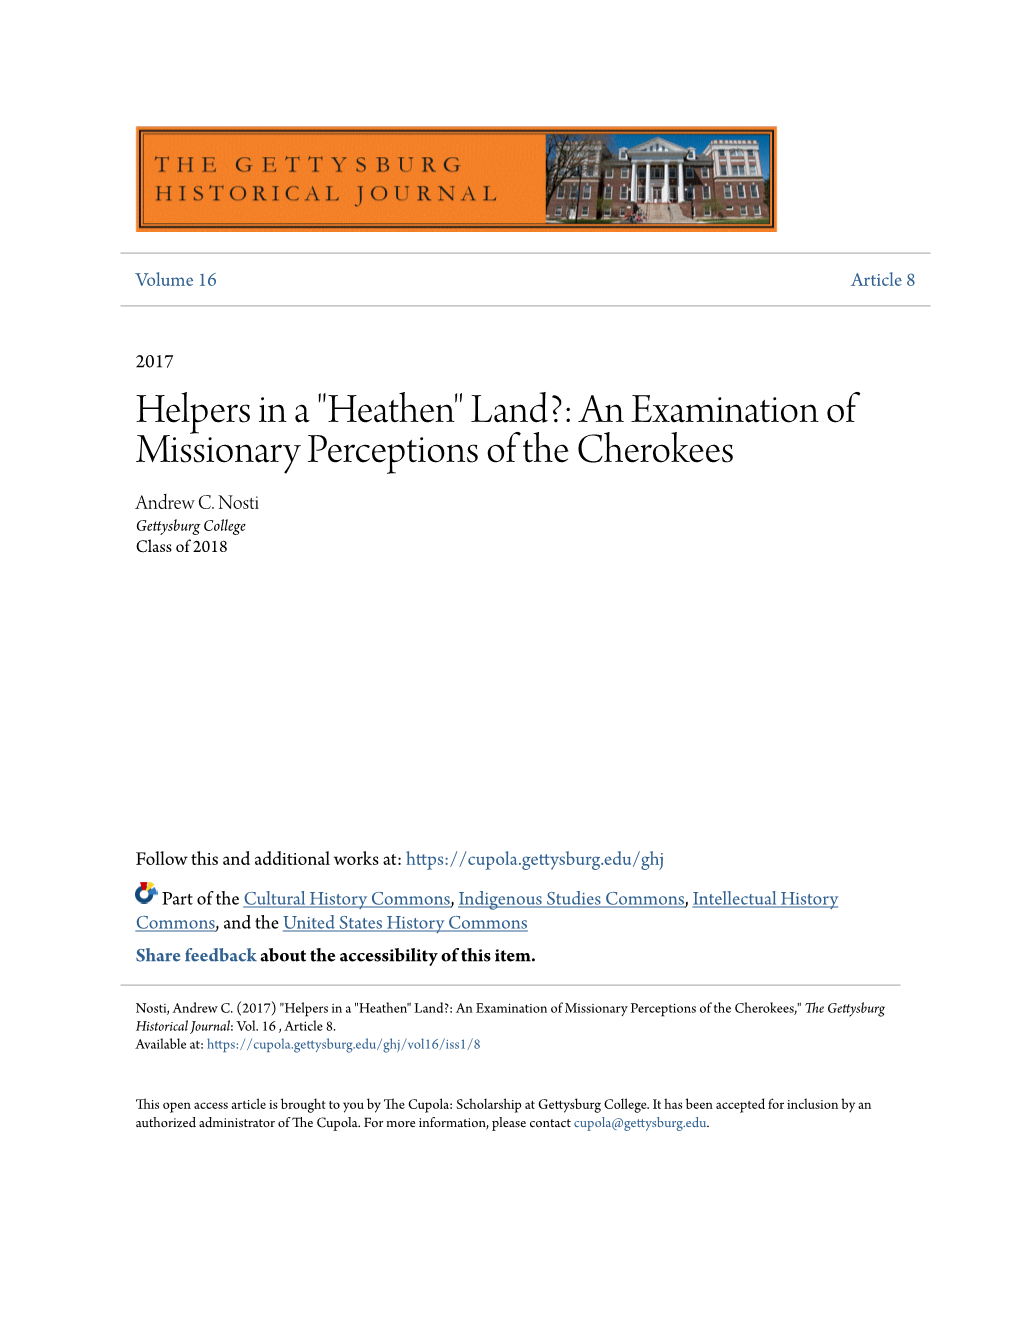 Heathen" Land?: an Examination of Missionary Perceptions of the Cherokees Andrew C